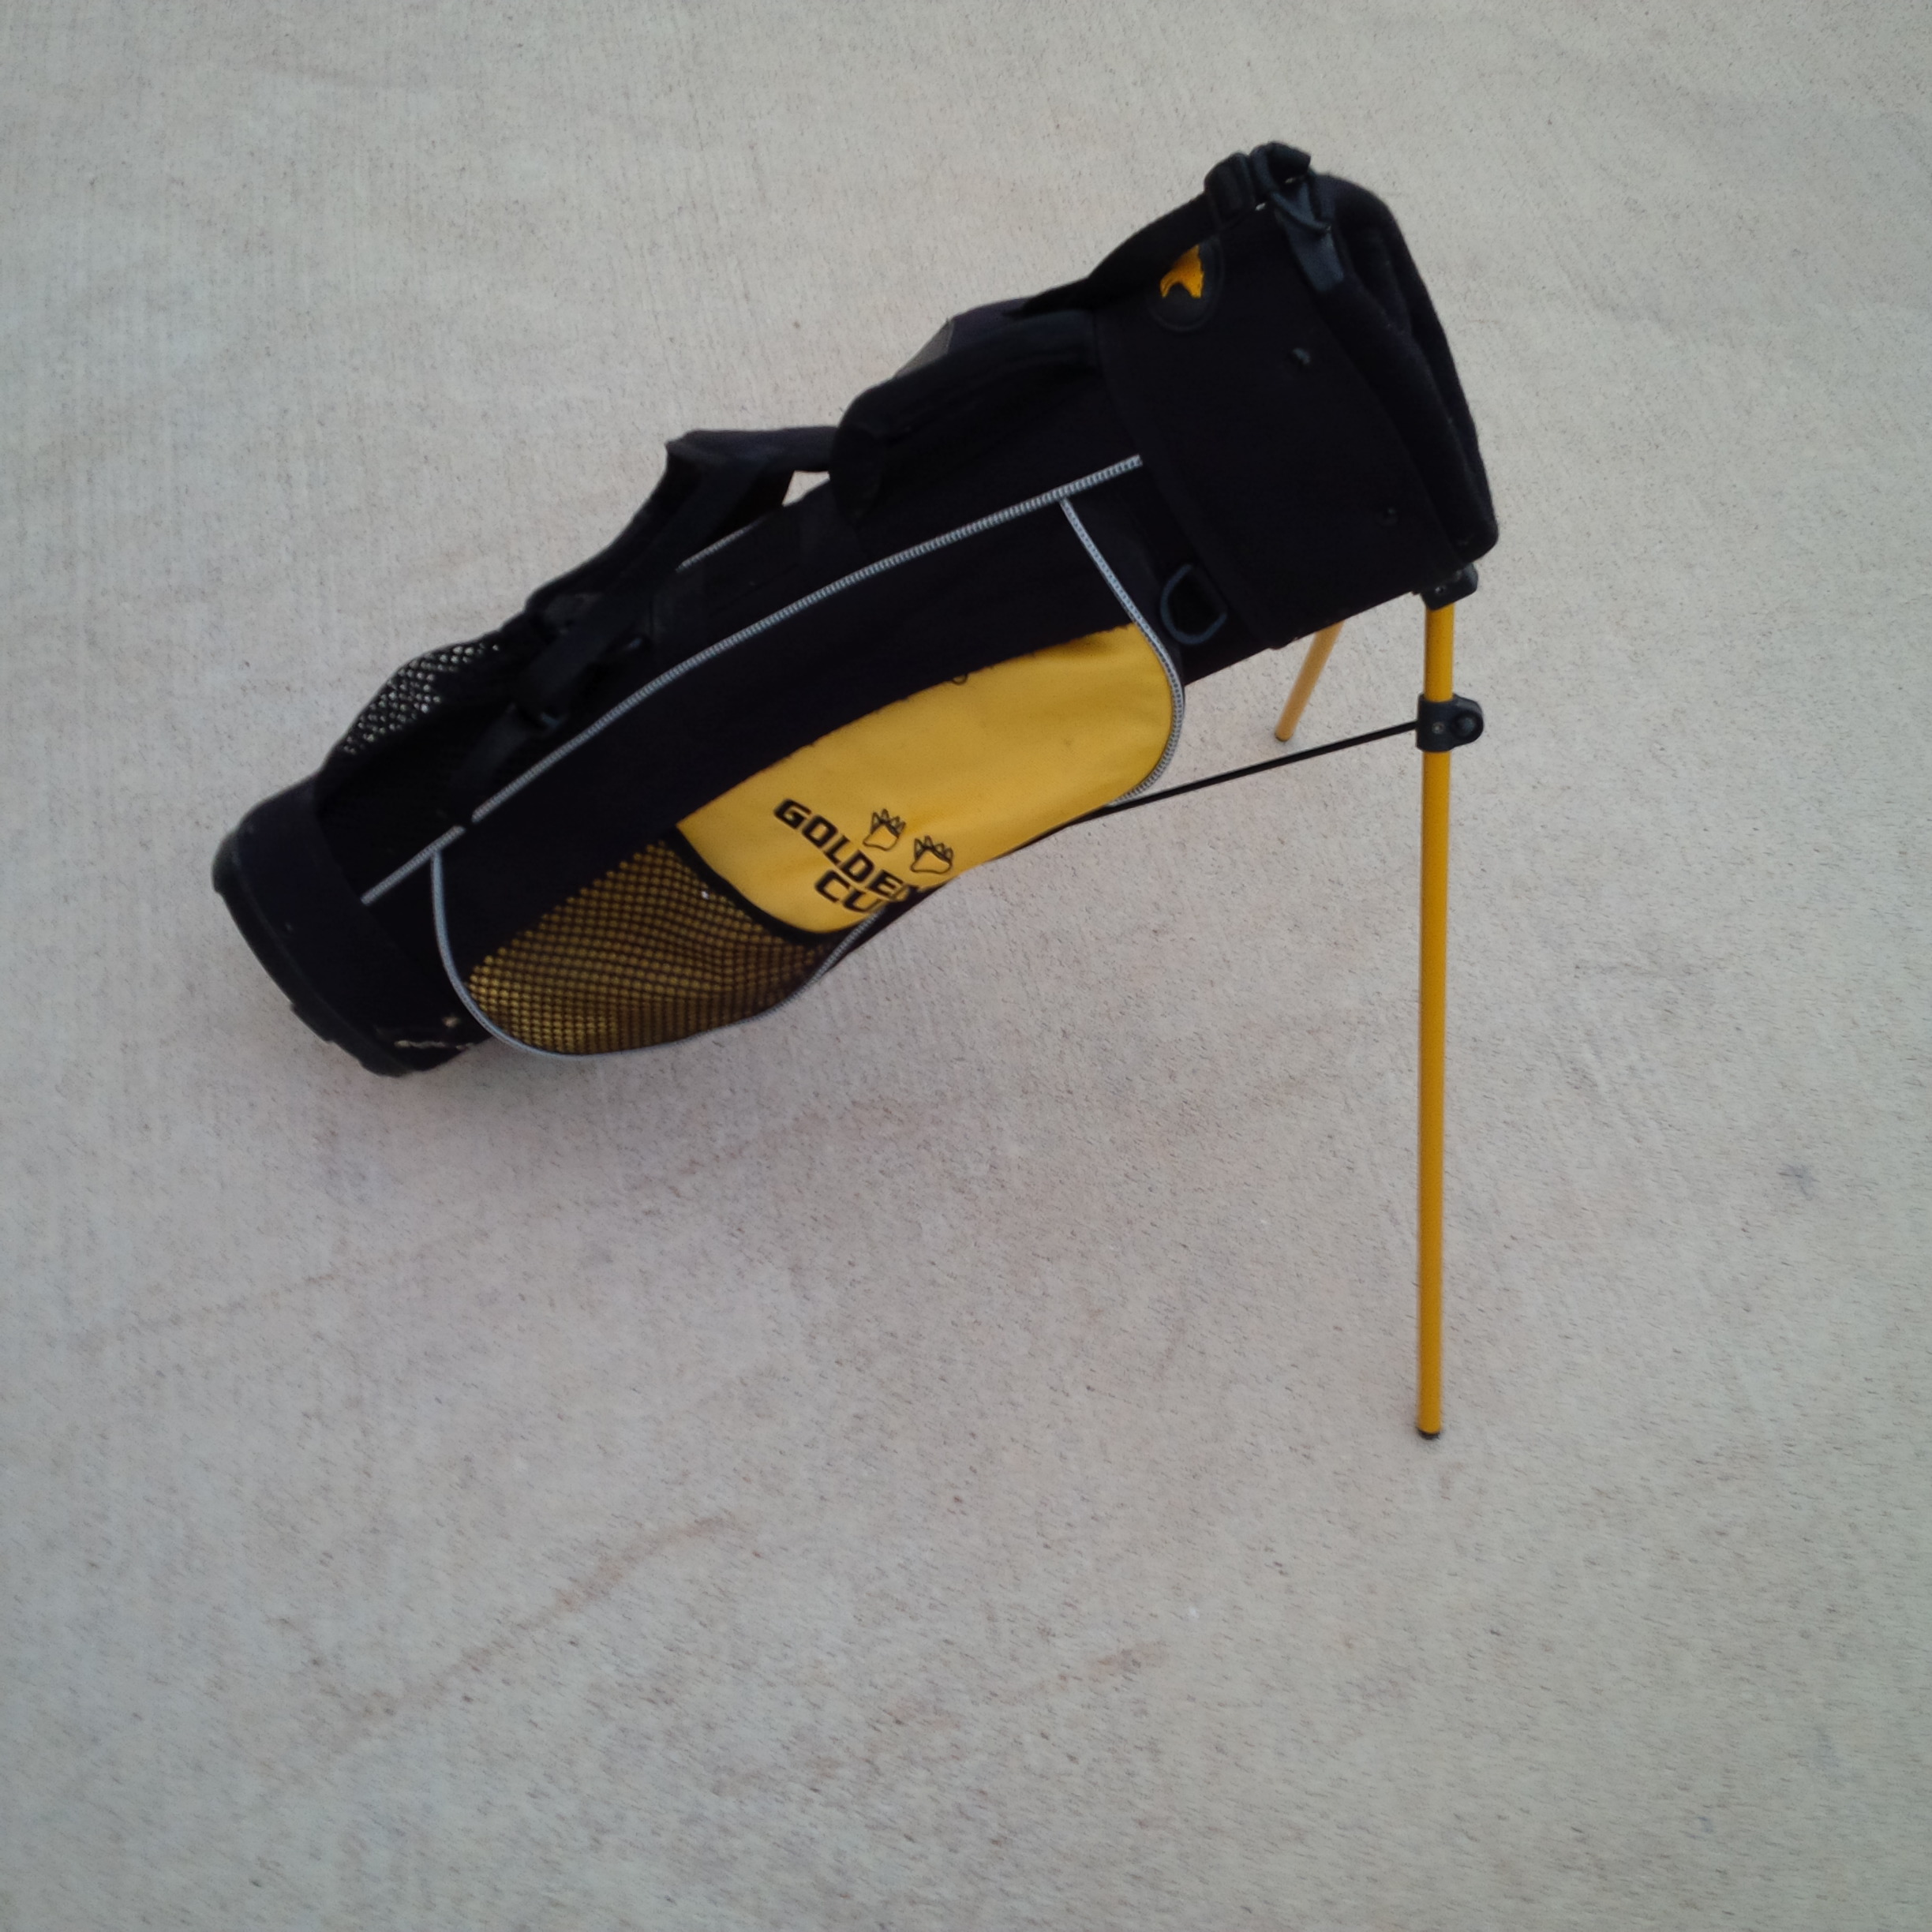 Used   Golden Cub Bear Black and Yellow Golf Bag for Ages...